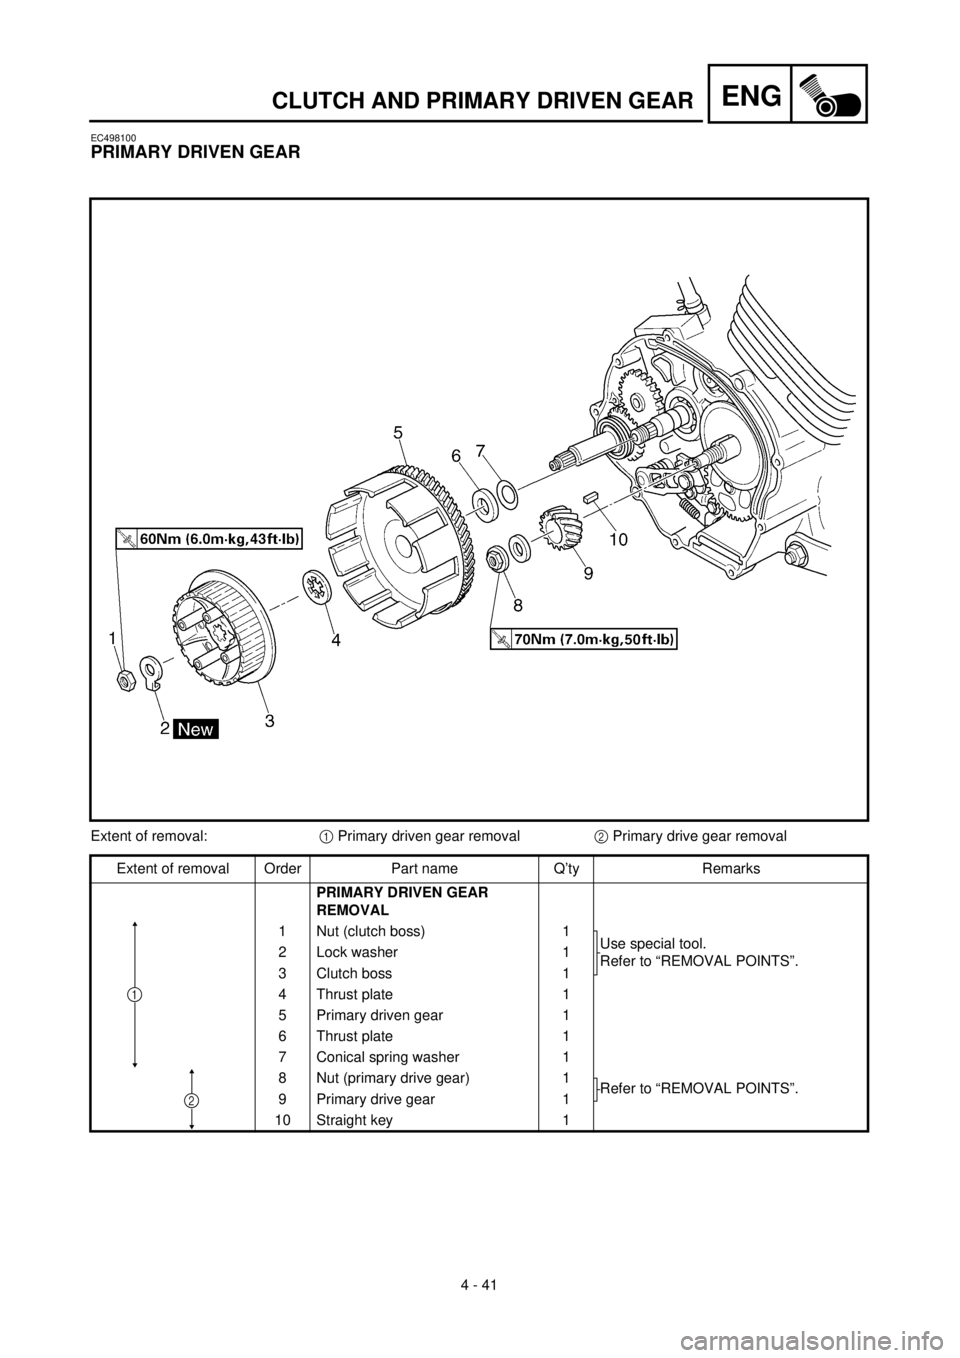 YAMAHA TTR125 2001  Owners Manual  
4 - 41
ENG
 
CLUTCH AND PRIMARY DRIVEN GEAR 
EC498100 
PRIMARY DRIVEN GEAR 
Extent of removal:  
1  
 Primary driven gear removal  
2  
 Primary drive gear removal
Extent of removal Order Part name 